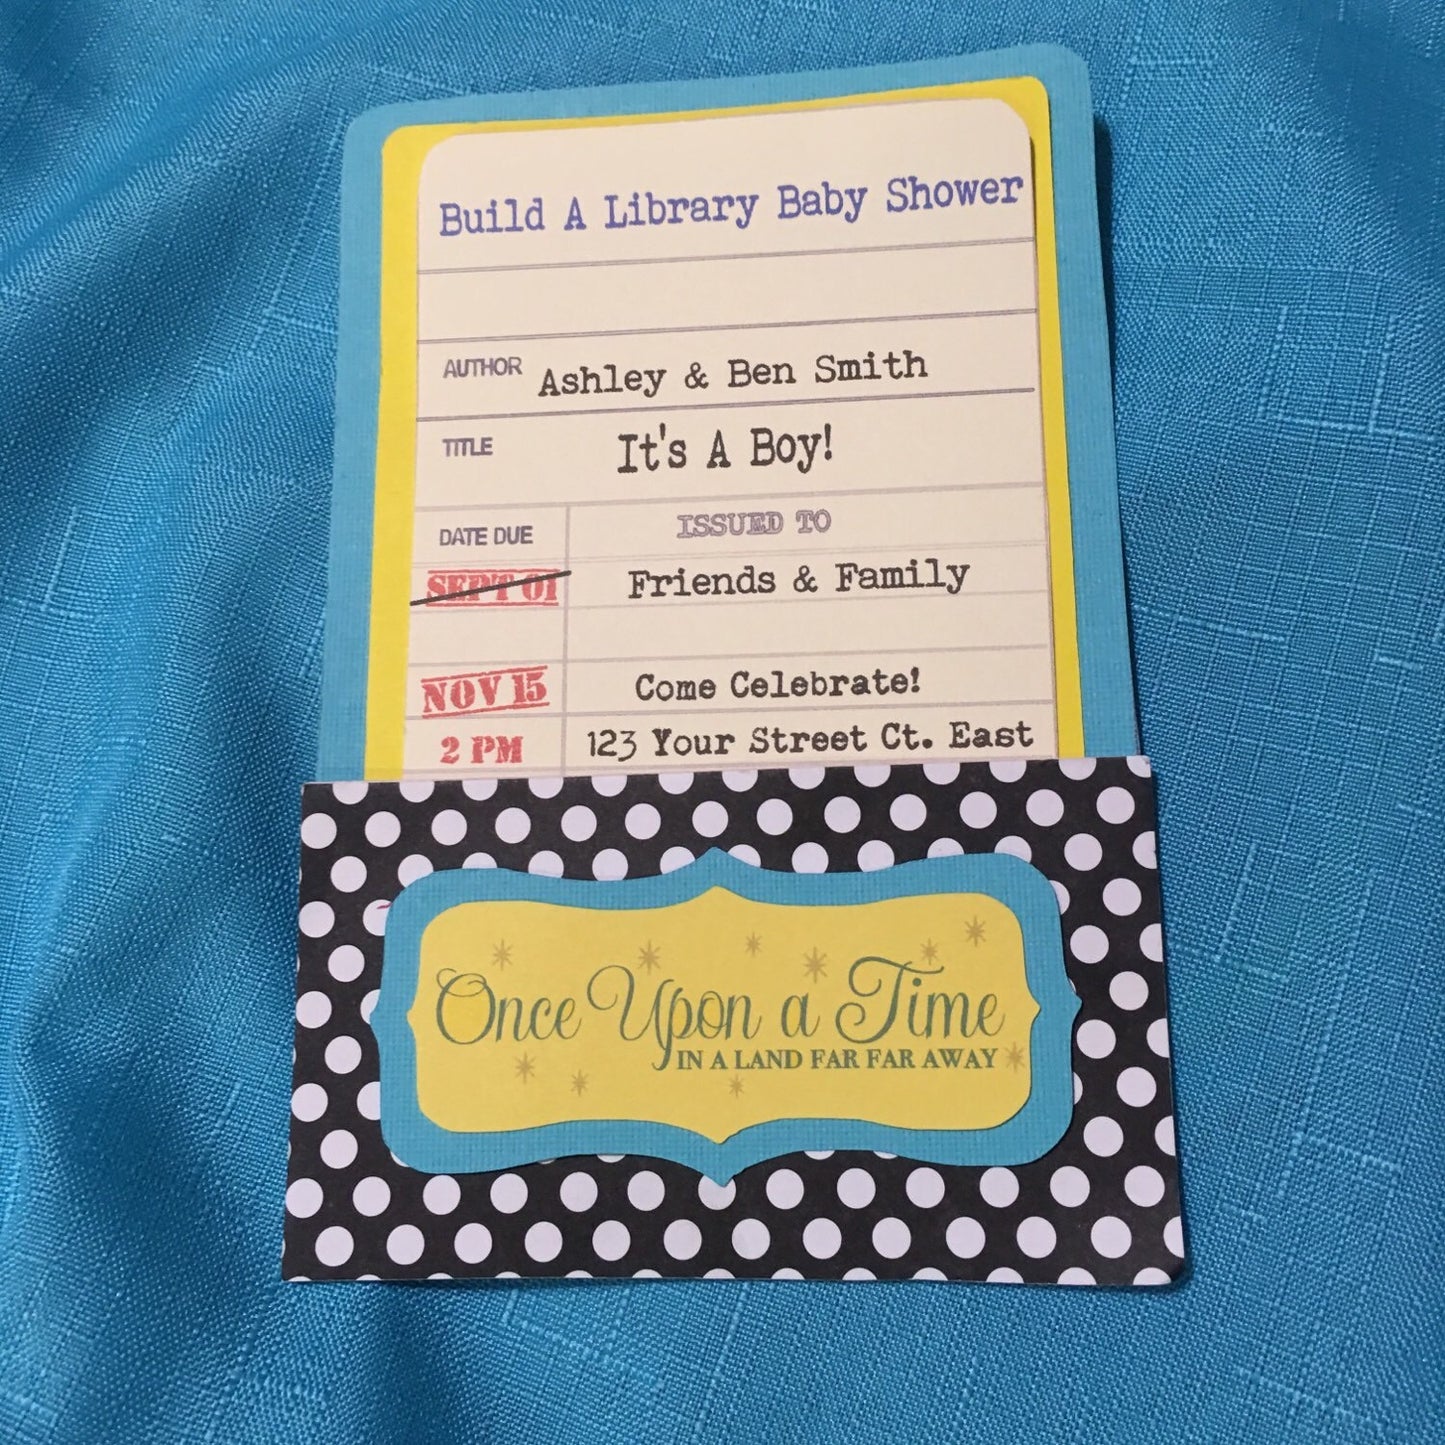 Library Card Baby Shower Invitation set of 12 invites with library card and envelope.